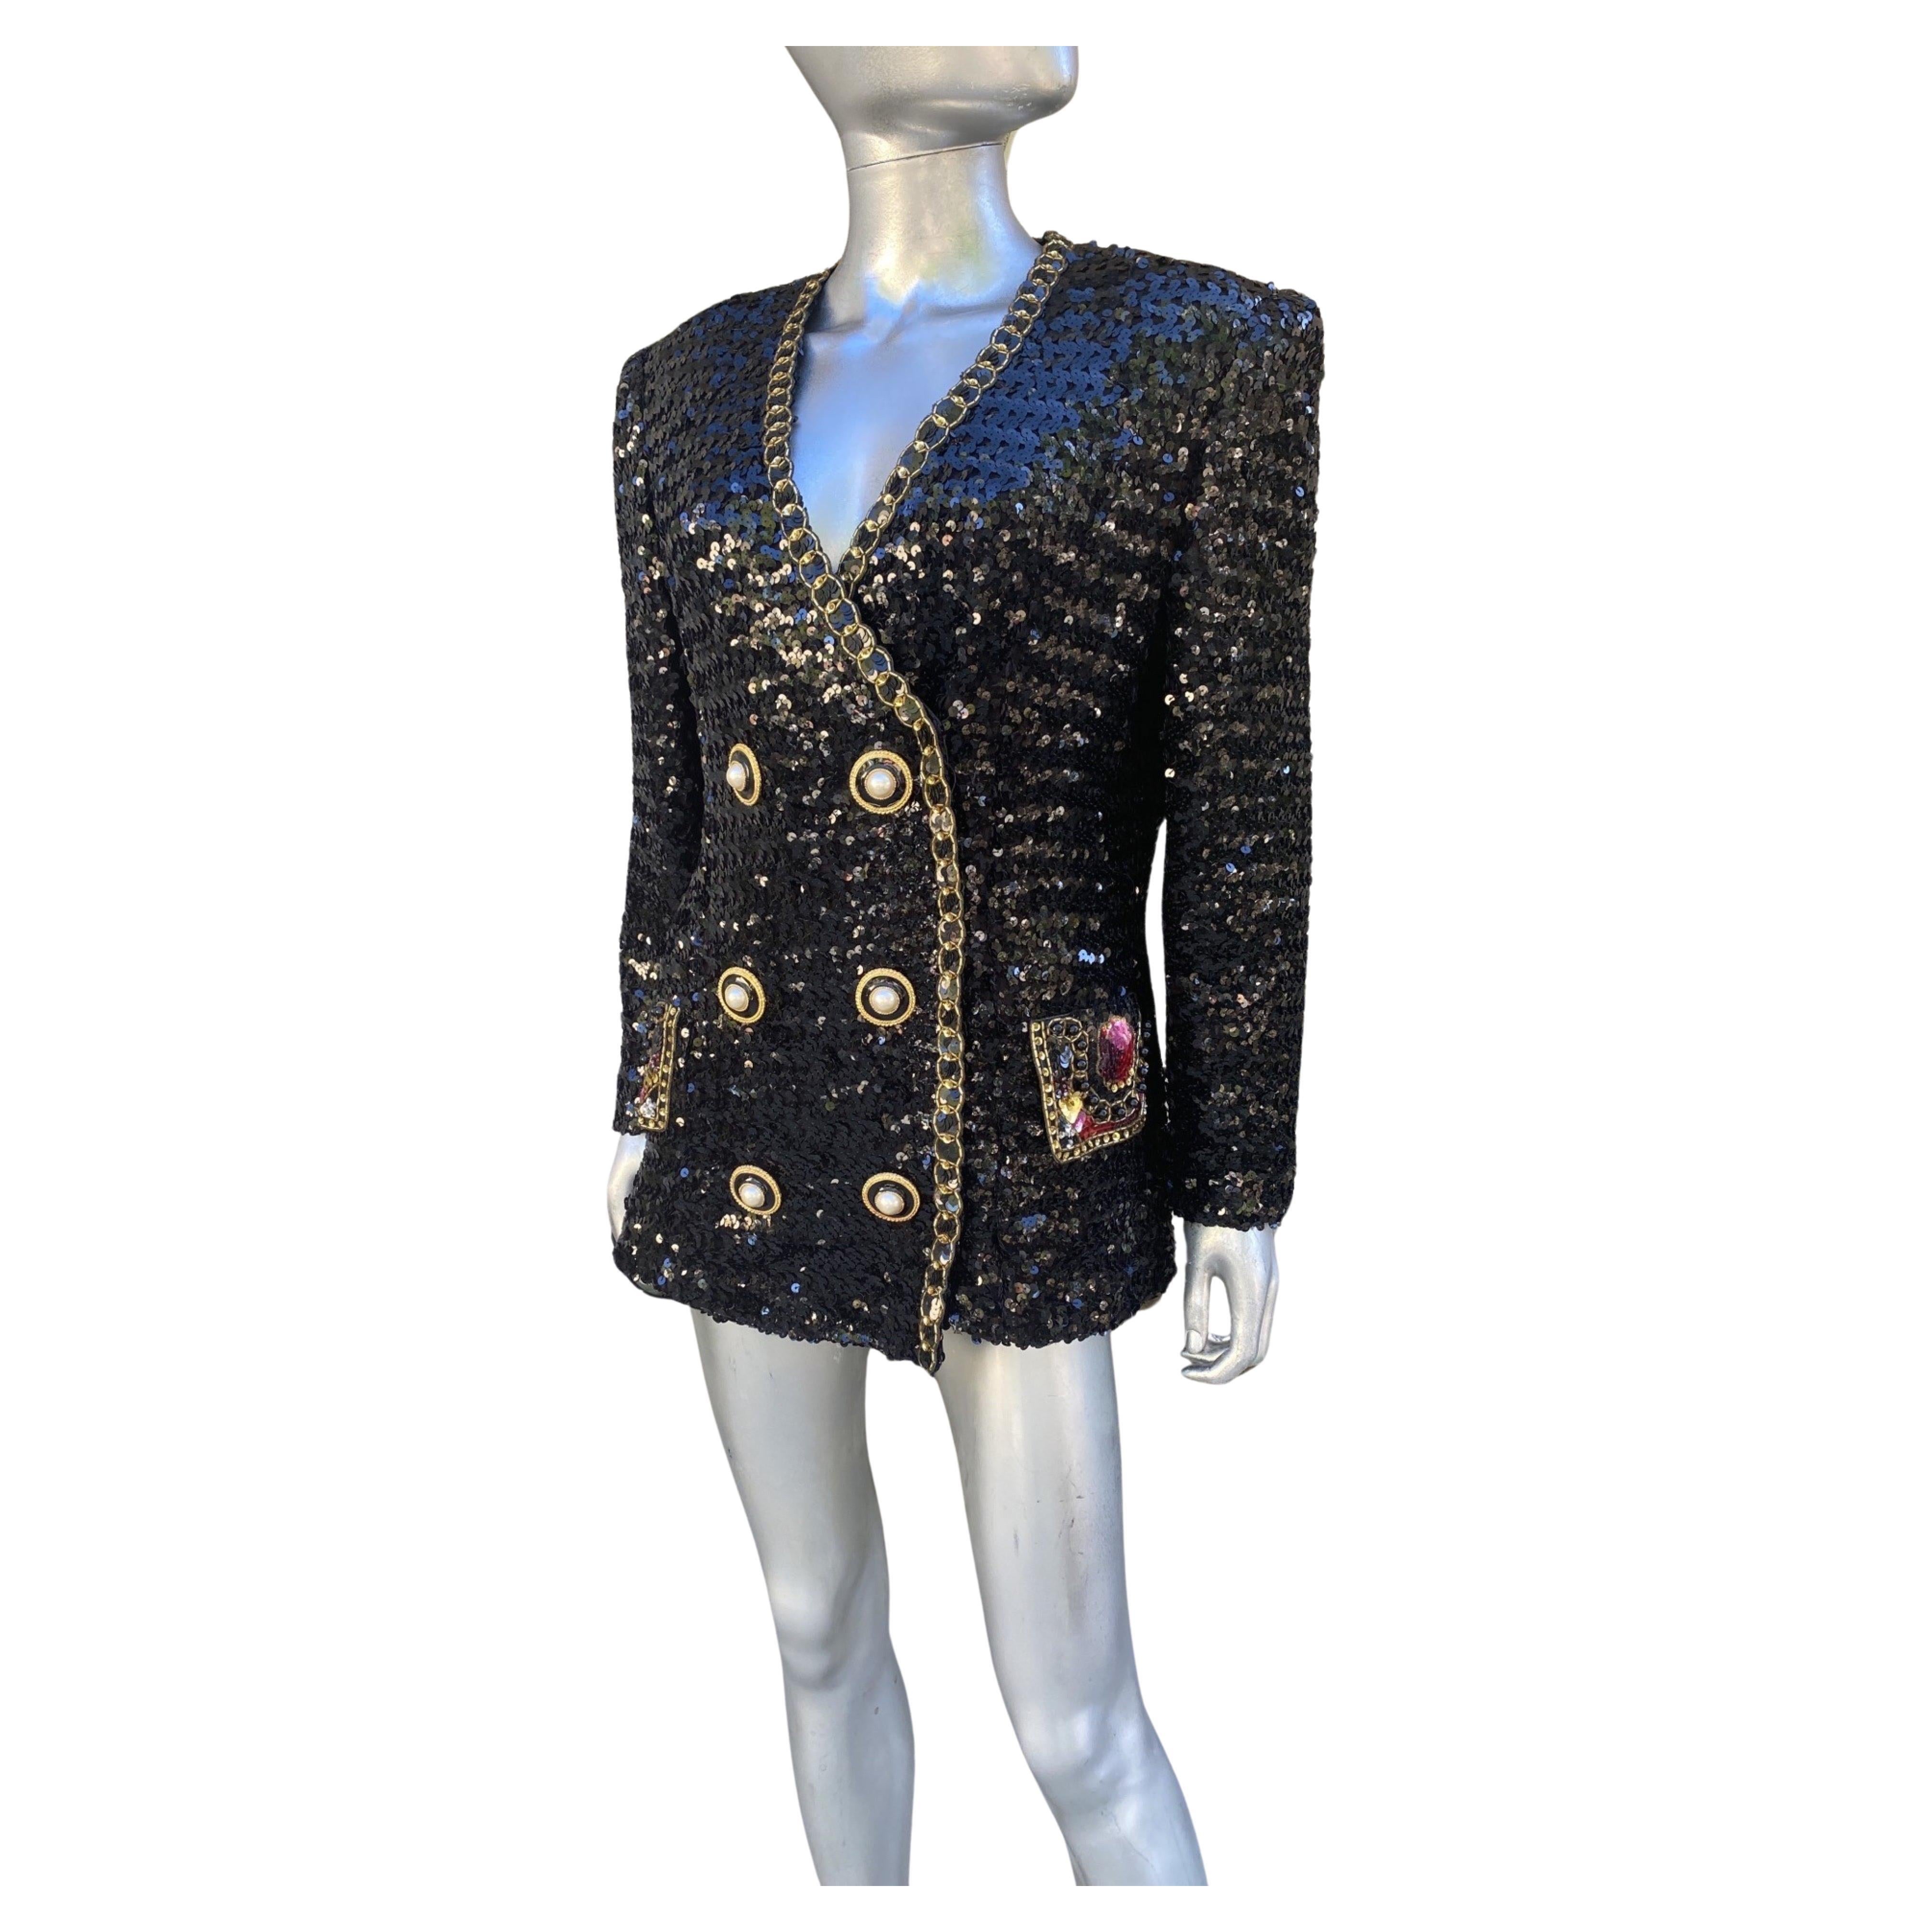 They don’t make them like they used to! Specially made for a Lillie Rubin Boutiques, this rare jacket was purchased in Florida at Bal Harbor. The detail and workmanship on this jacket looks like it would cost thousands of dollars. The jacket is